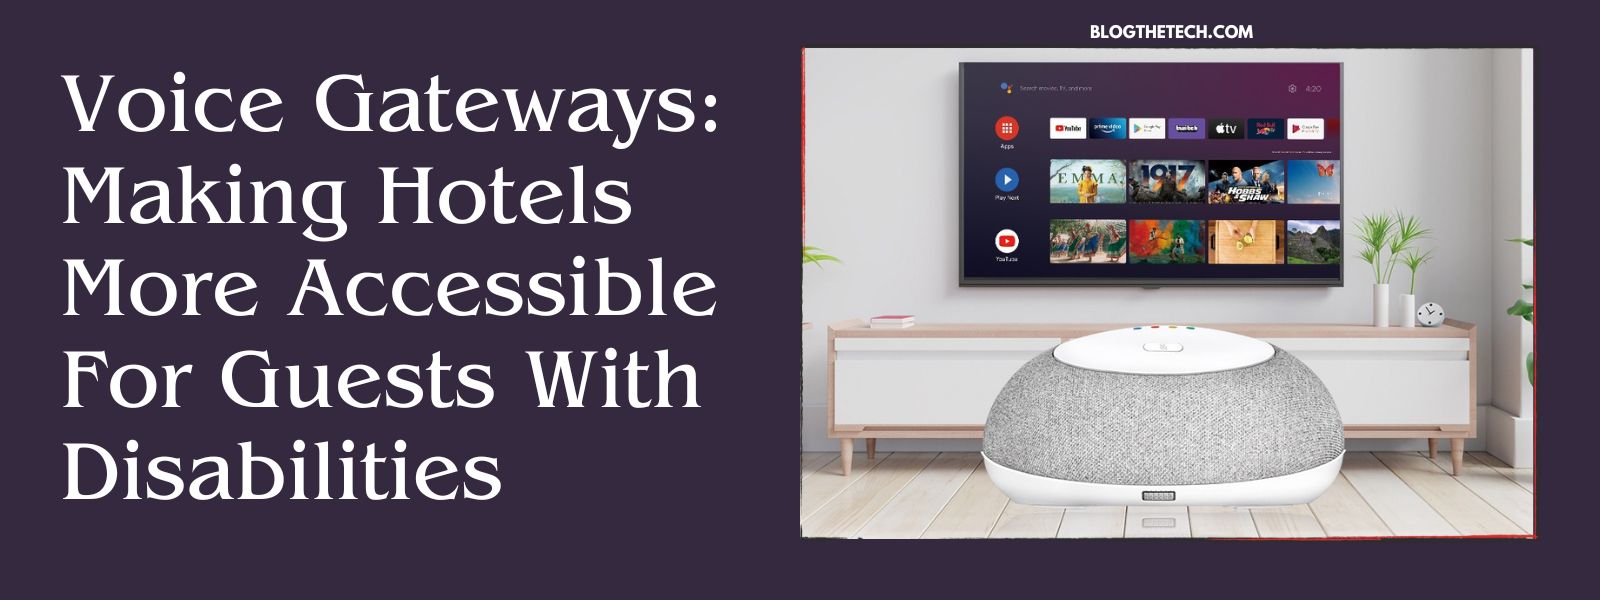 Voice-Gateways-Making-Hotels-More-Accessible-For-Guests-With-Disabilities-Featured